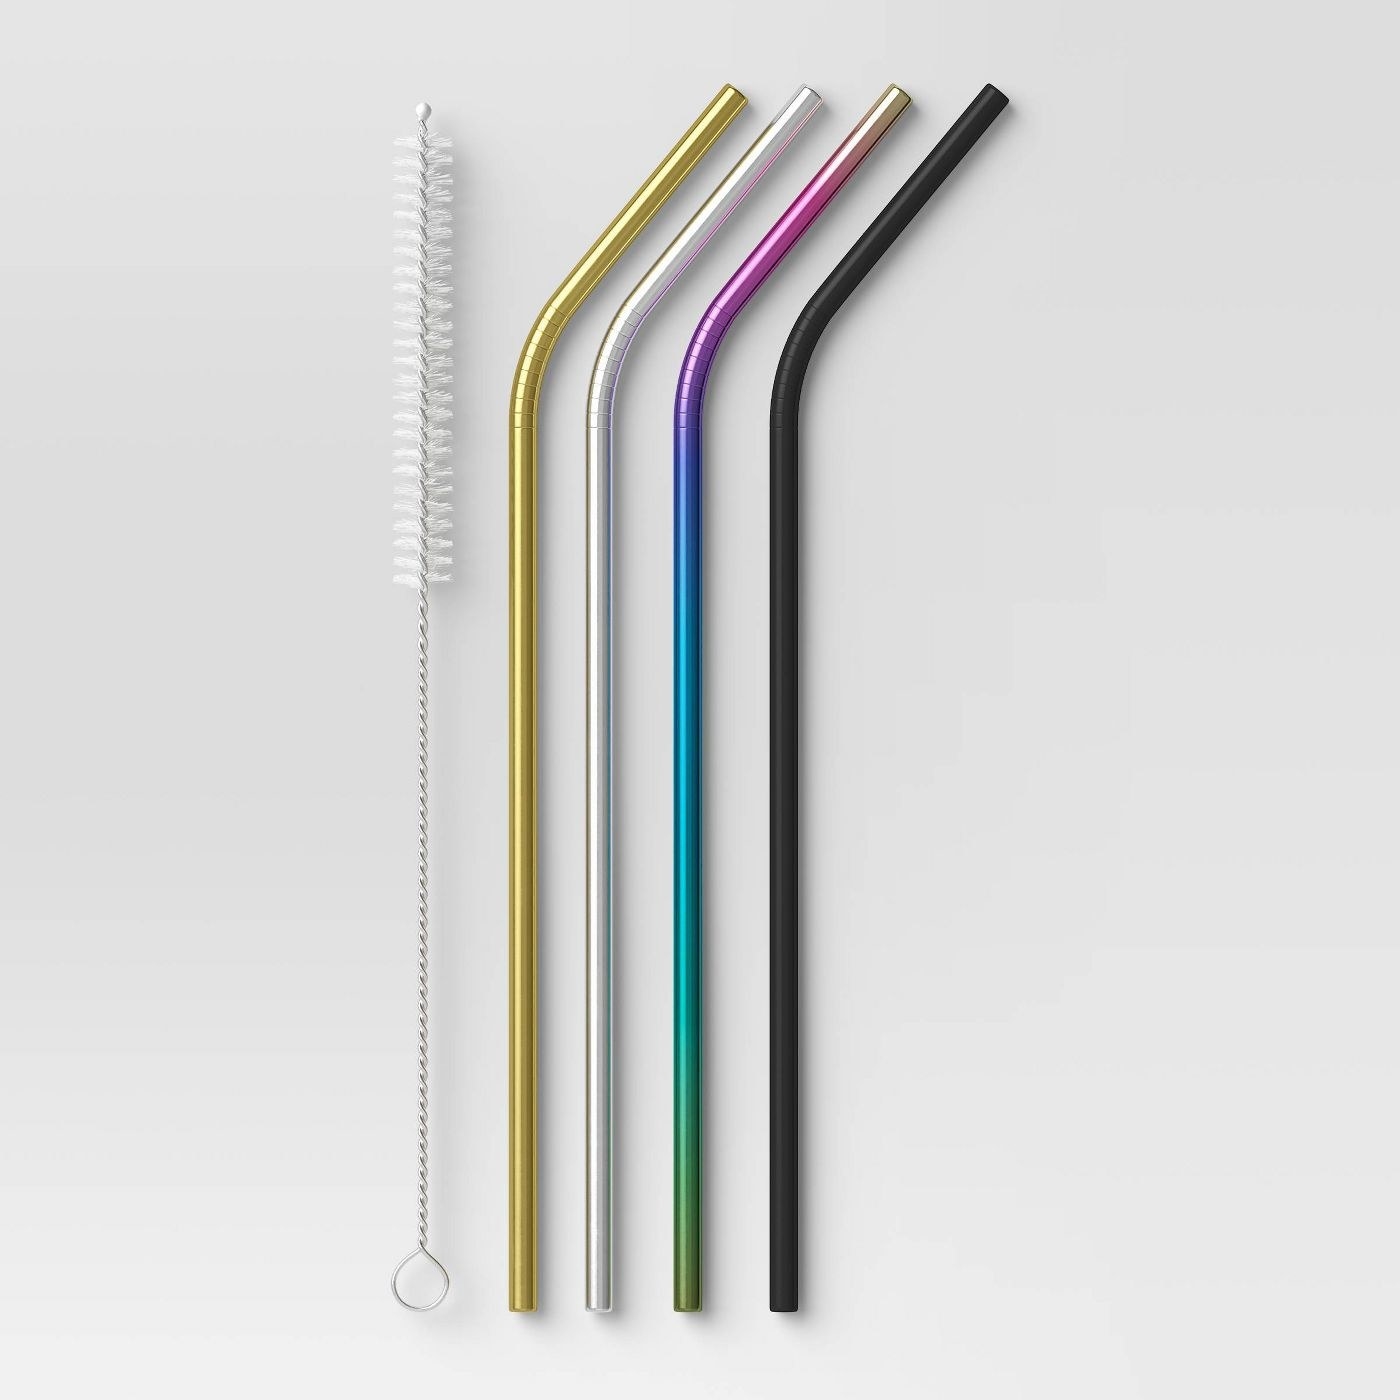 The stainless steel straws